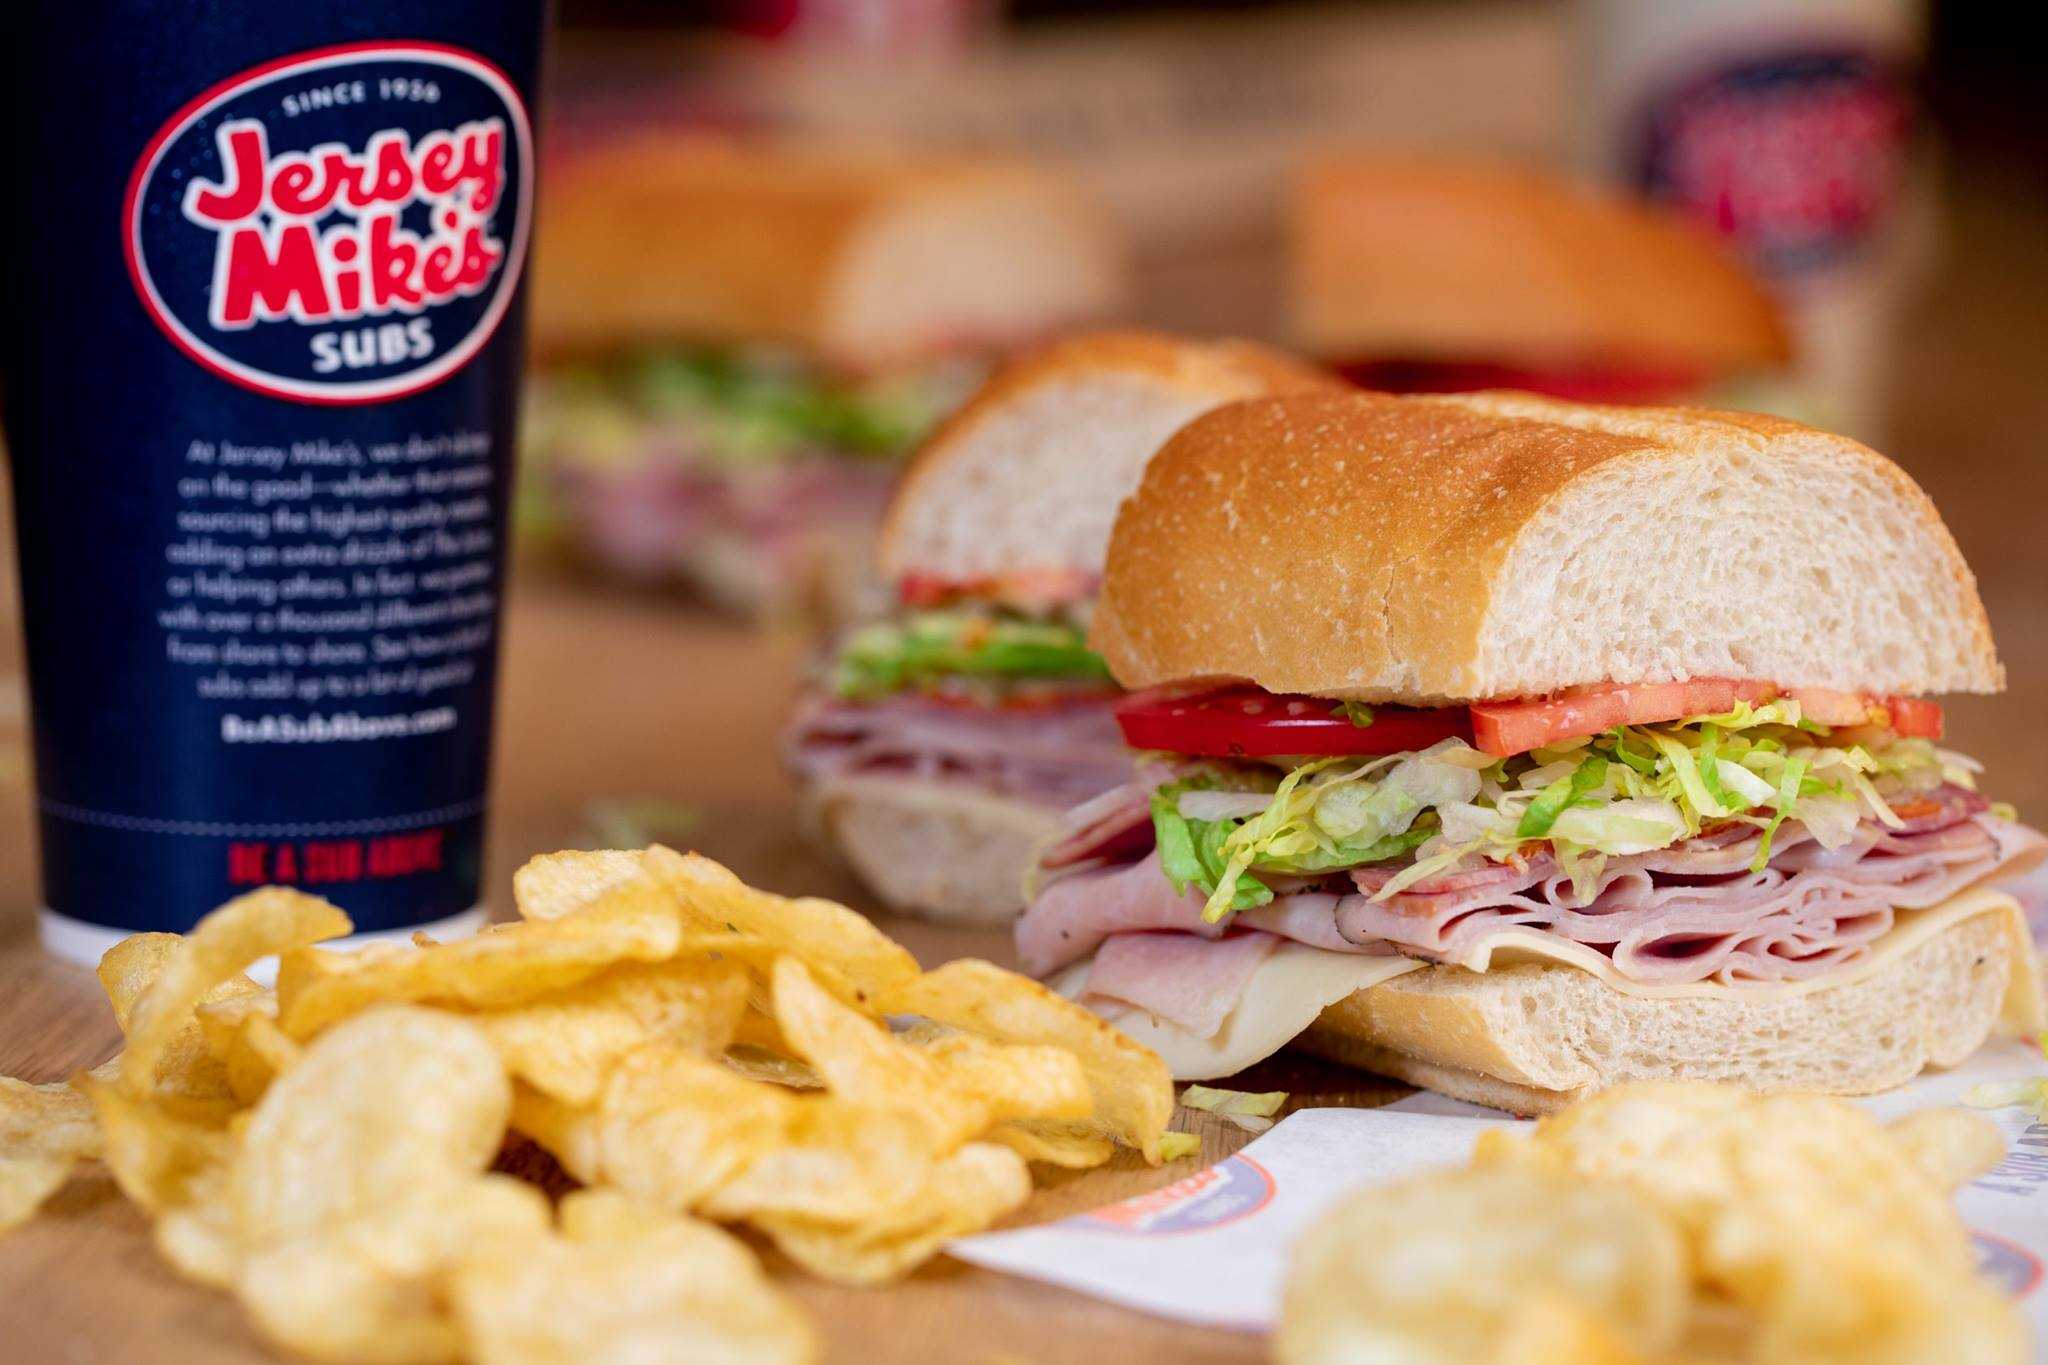 jersey mike's jeffersonville indiana